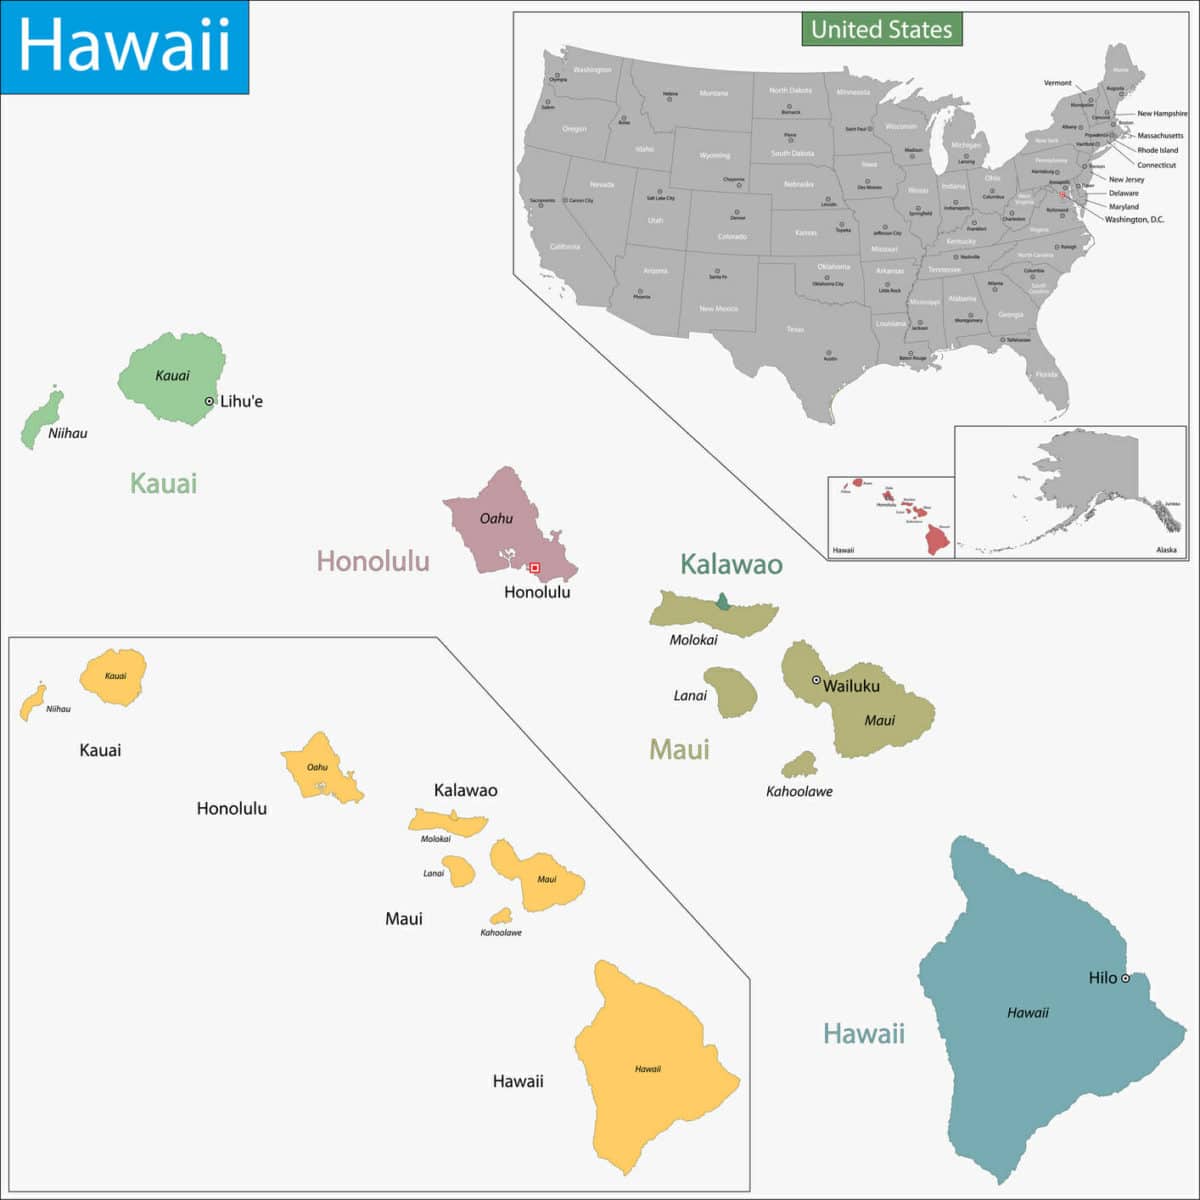 Map of Hawaii state designed in illustration with the counties and the county seats